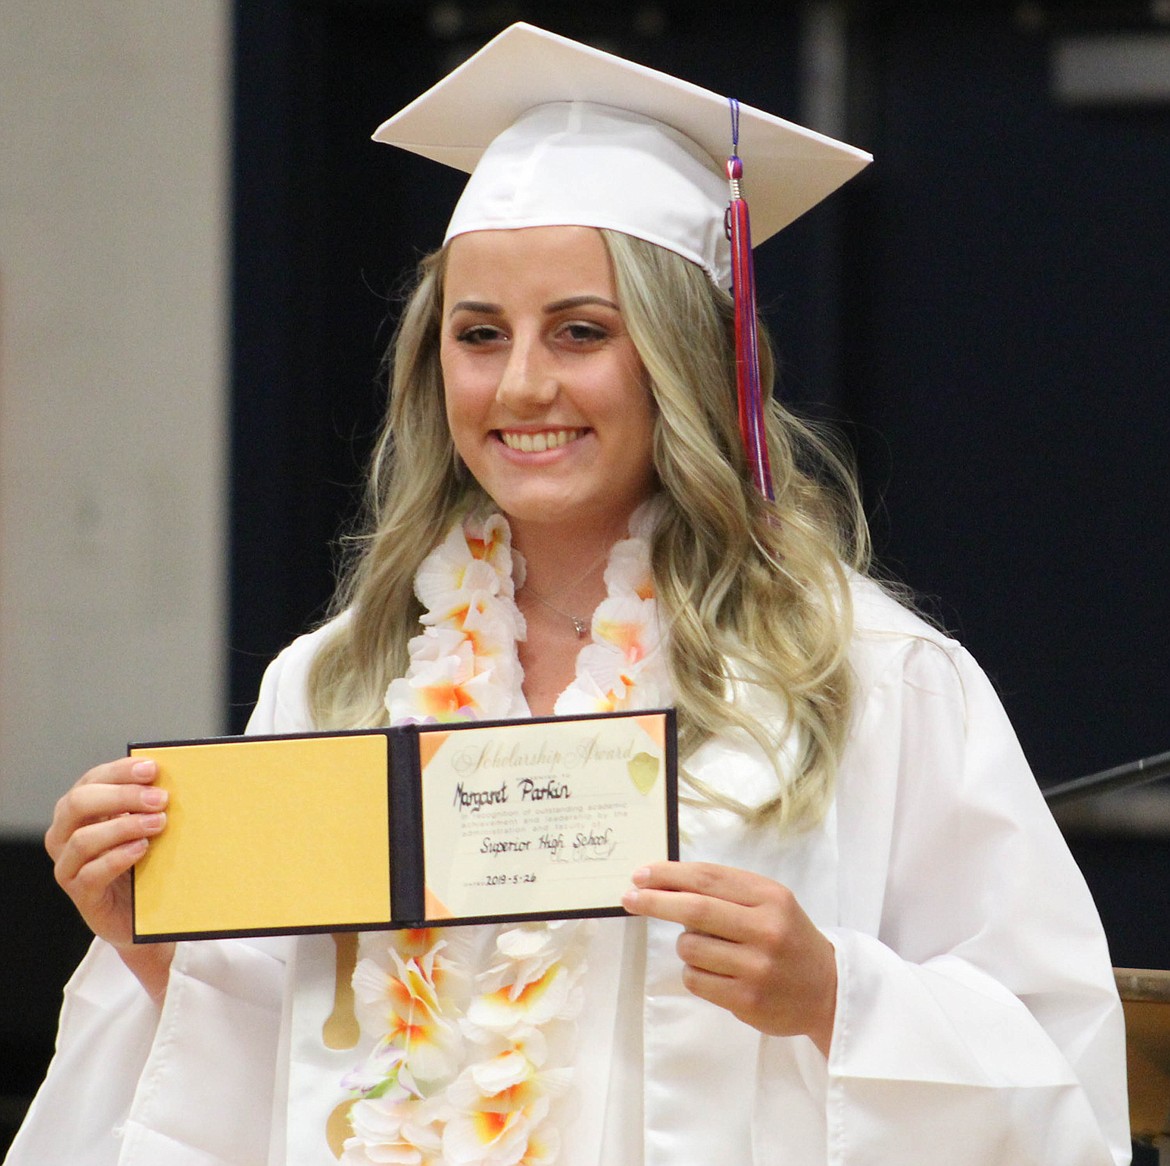 MARGARET PARKIN was a co-valedictorian for the Superior High School Class of 2019.